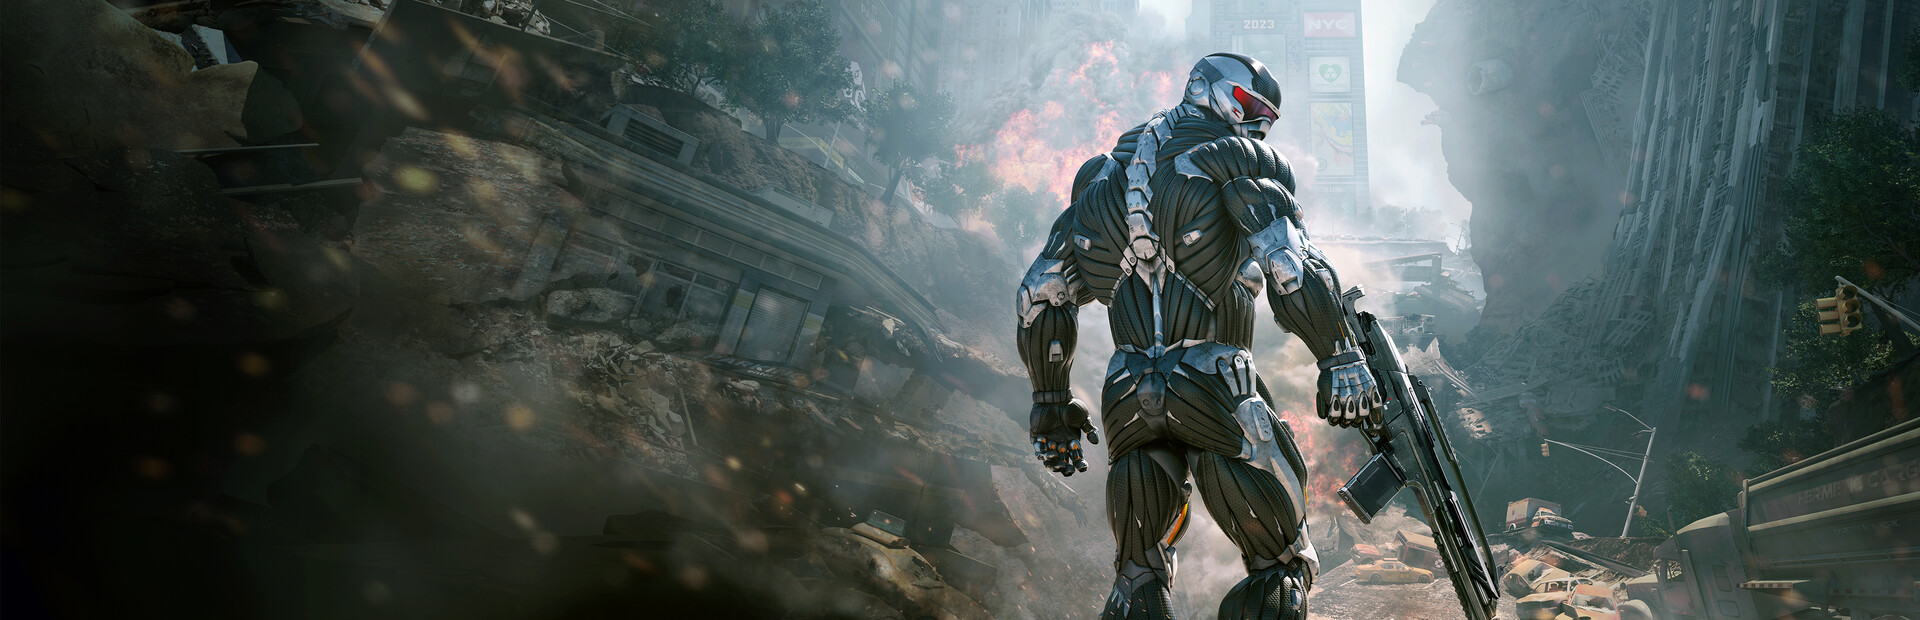 Crysis 2 Remastered cover image